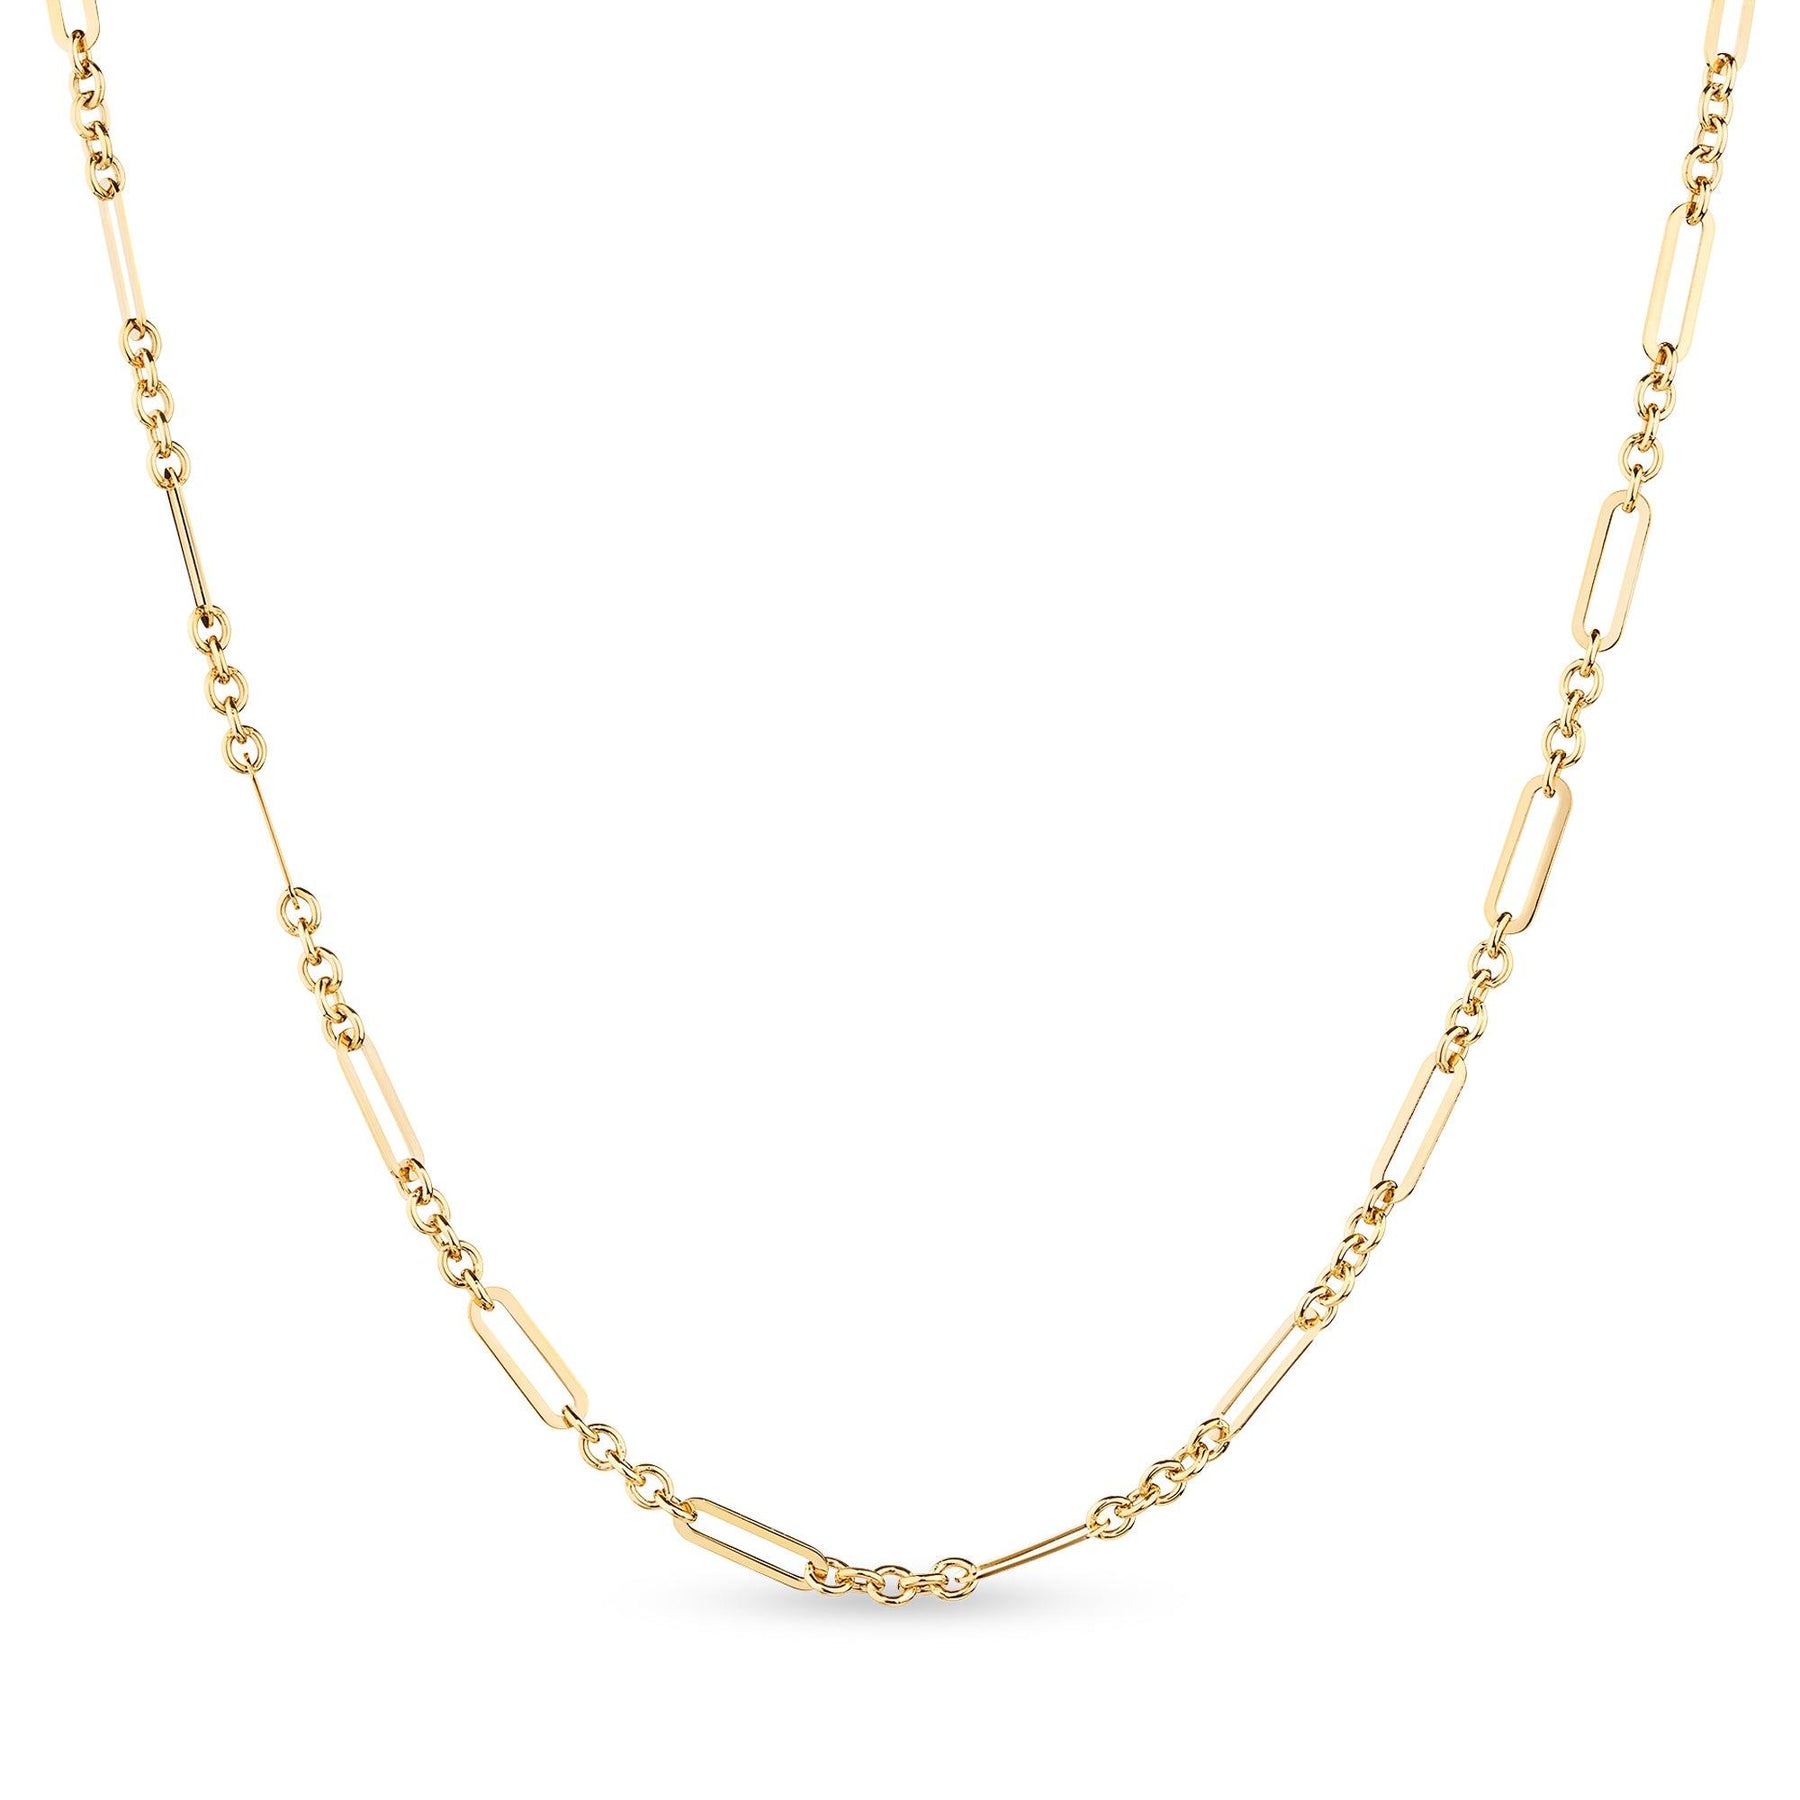 45cm Figaro Chain in 9ct Yellow Gold - Wallace Bishop